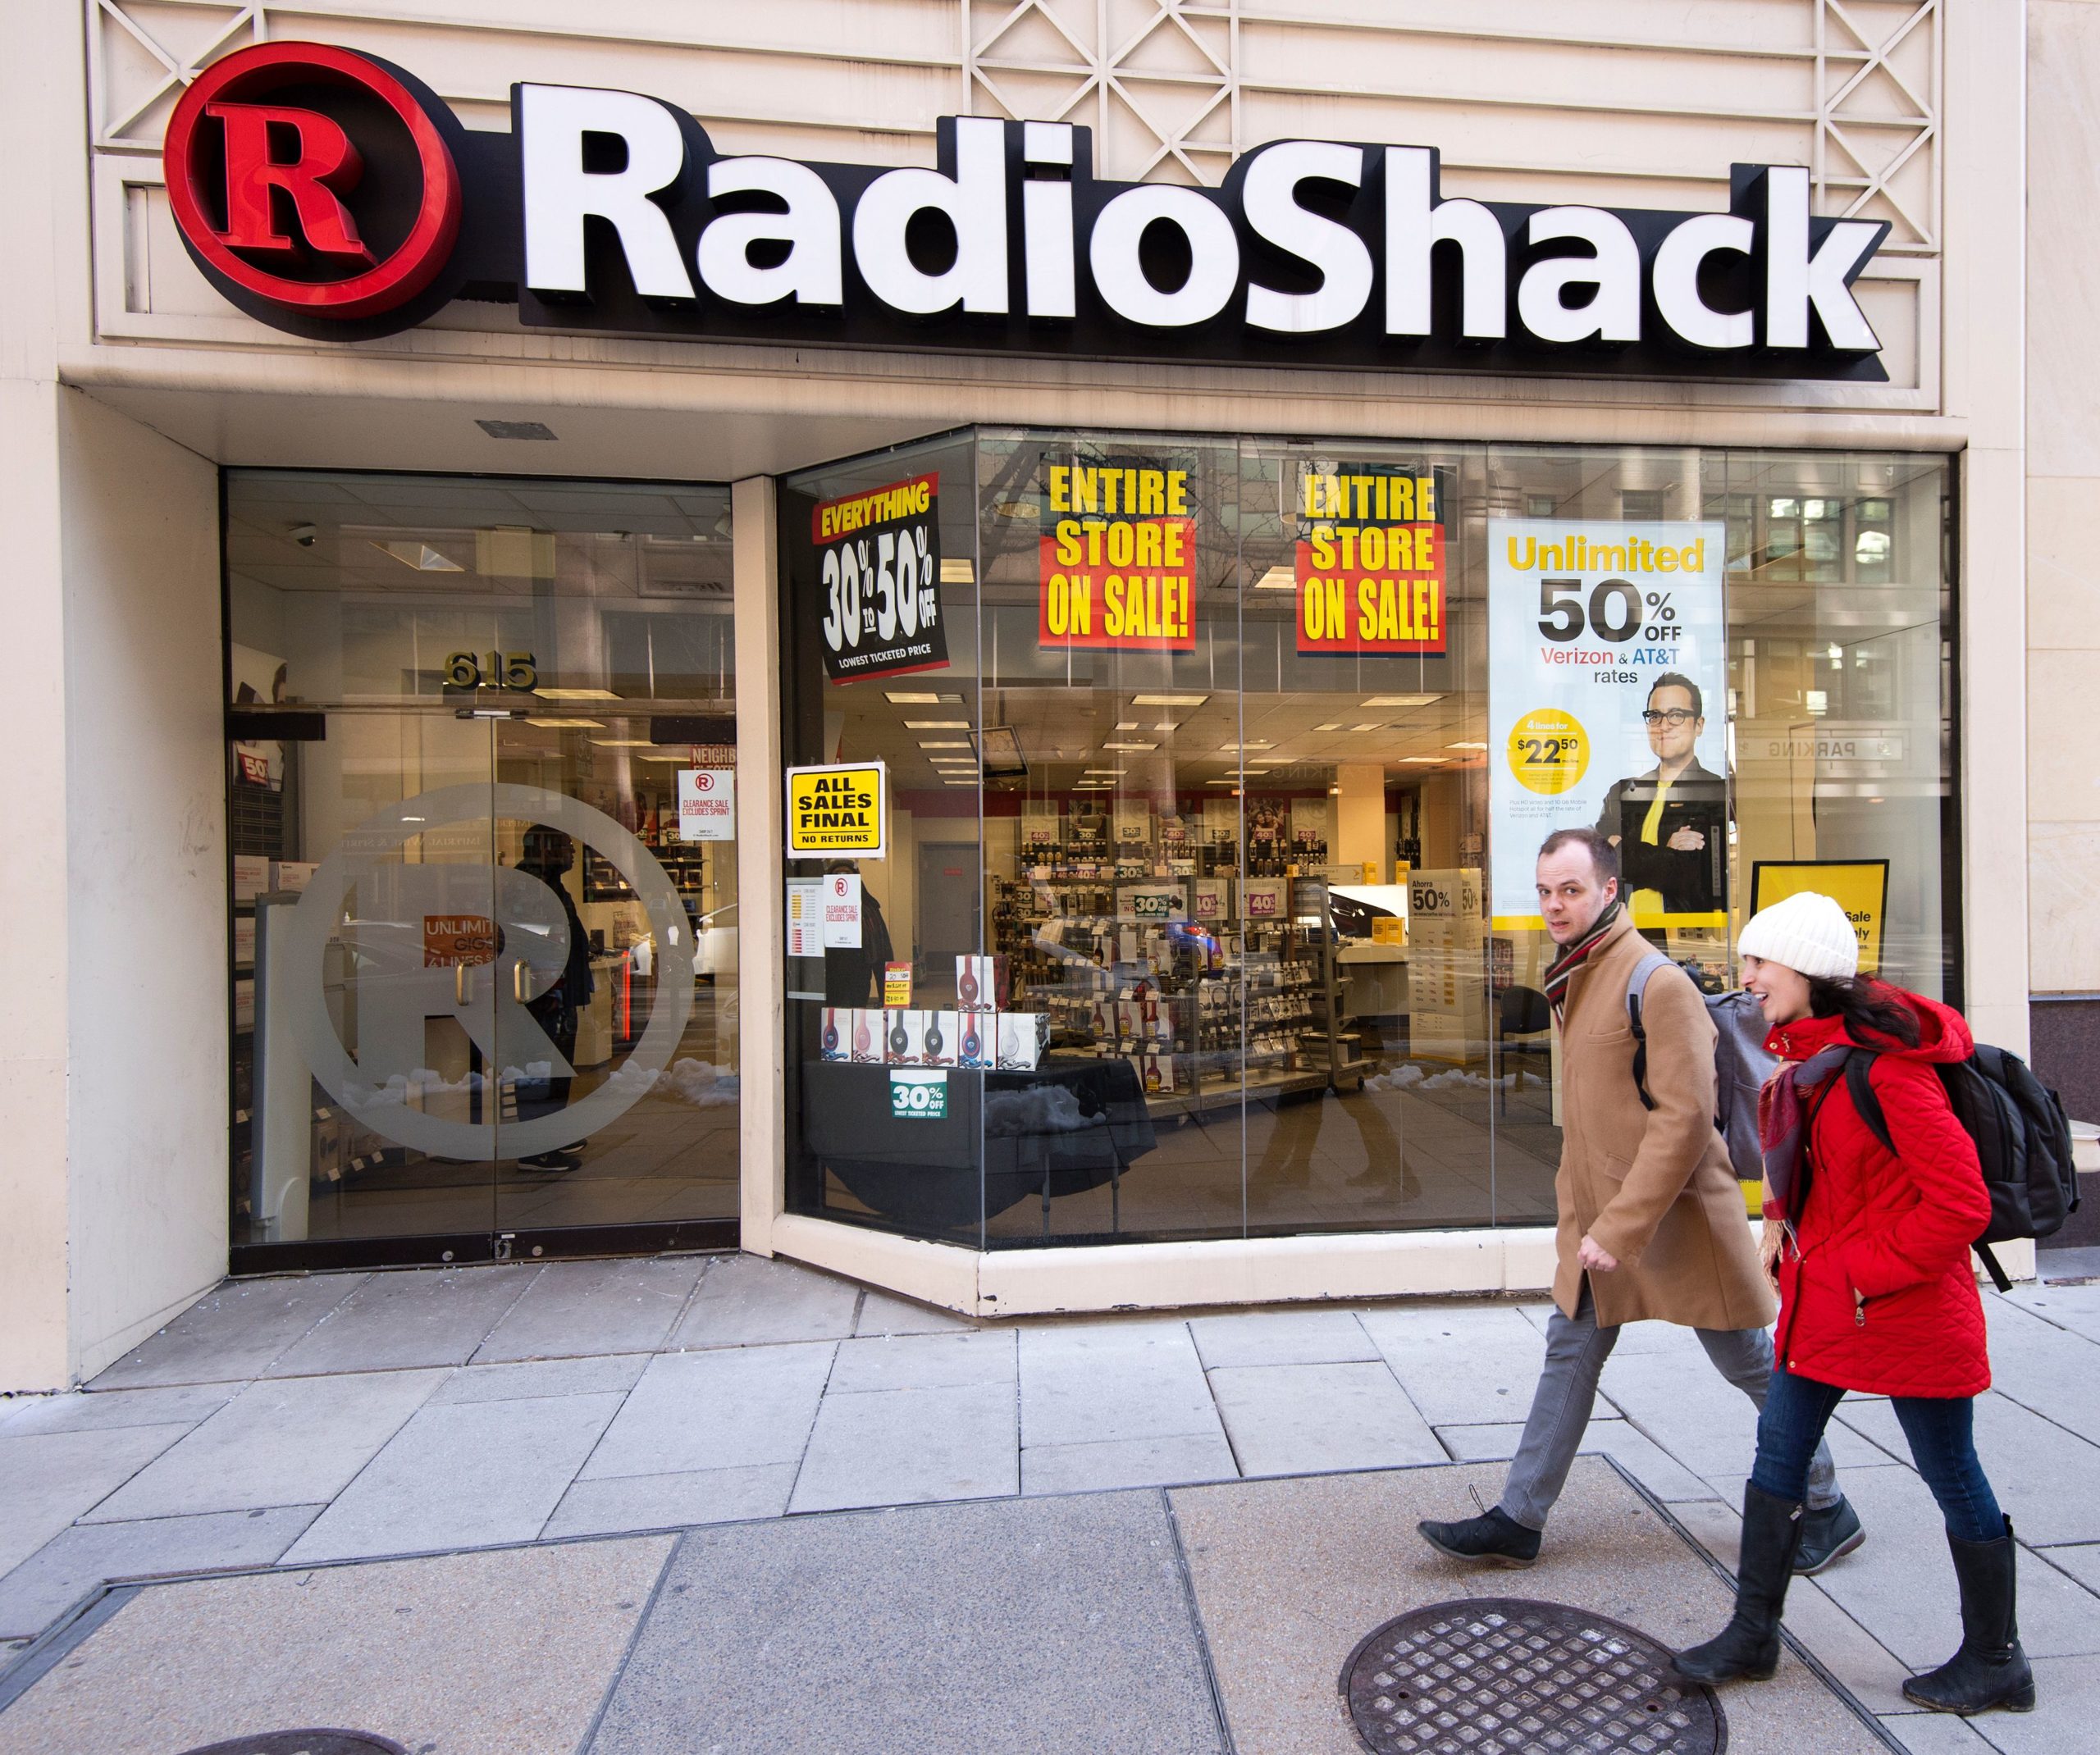 RadioShack best on cryptocurrency as its savior—and it might actually be working